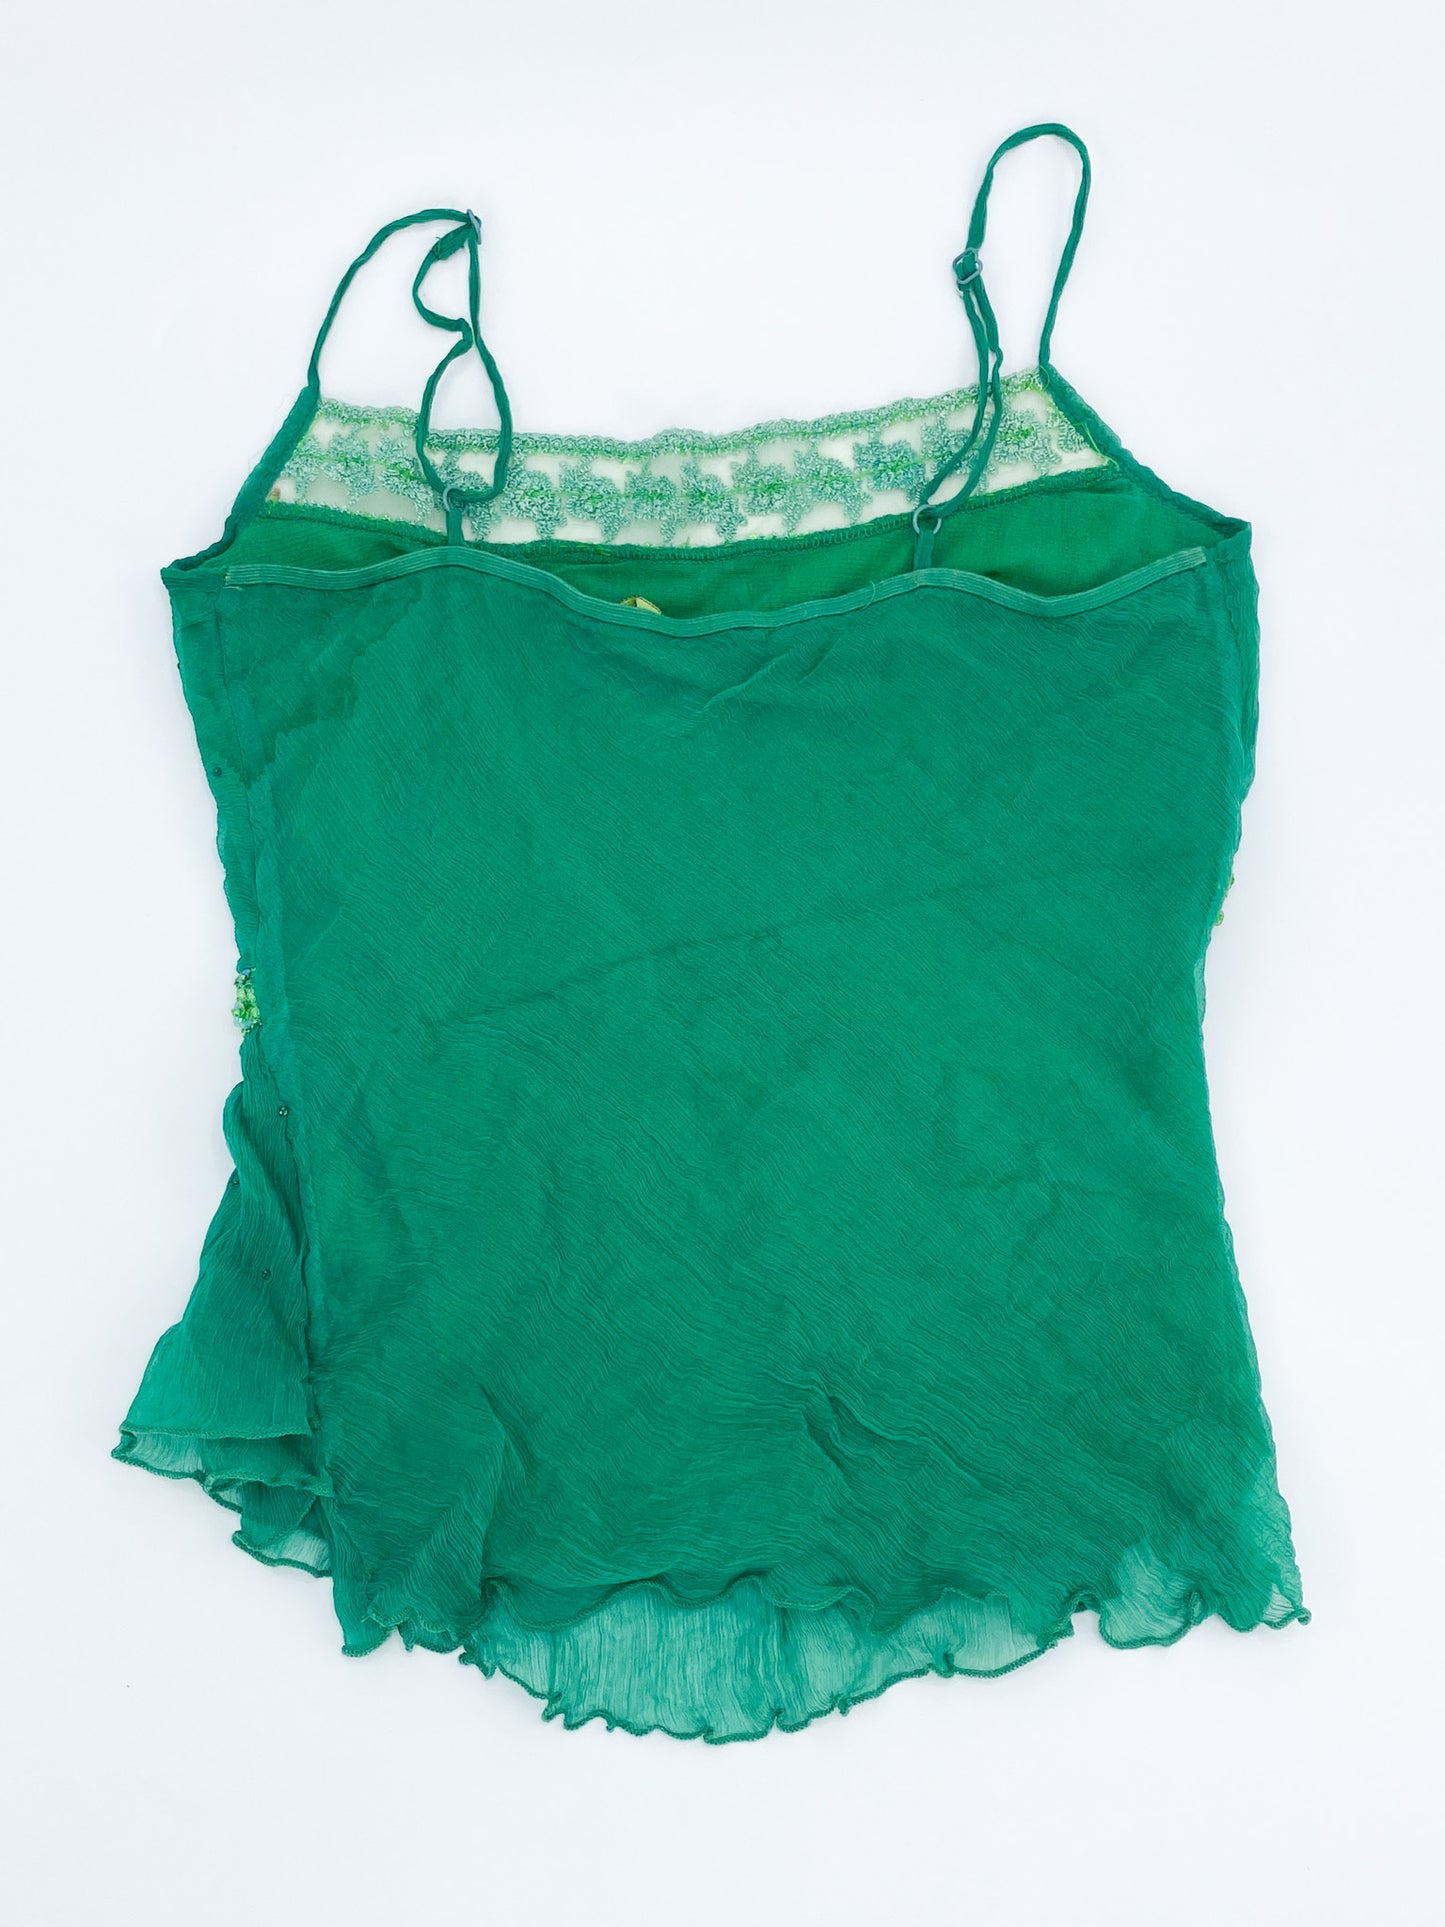 Vintage 00's Green Sequined Cami - S